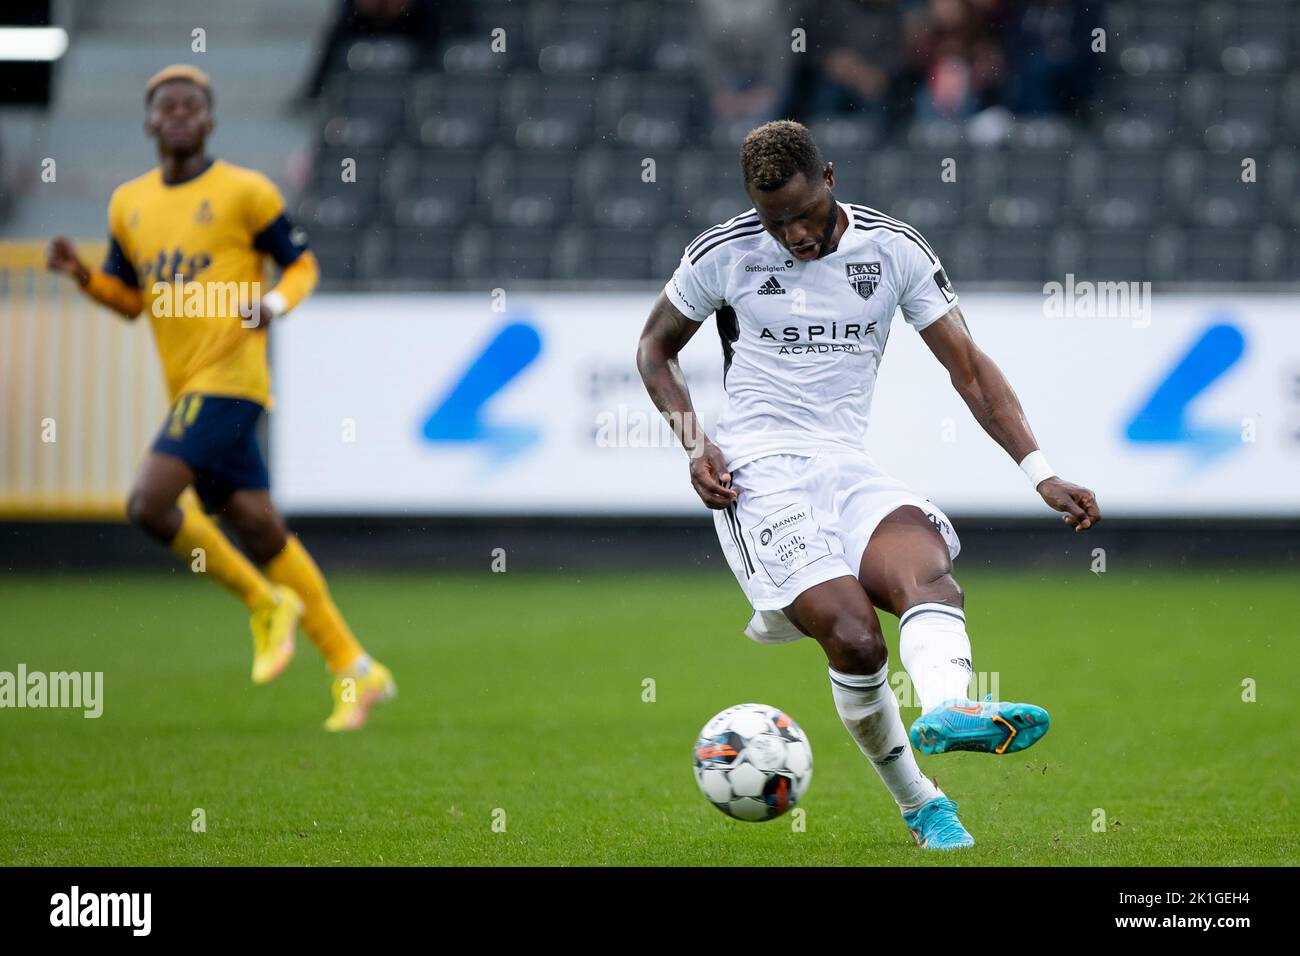 Eupen's Mubarak Wakaso pictured in action during a soccer match between KAS Eupen and RUSG Royale Union Saint-Gilloise, Sunday 18 September 2022 in Eupen, on day 9 of the 2022-2023 'Jupiler Pro League' first division of the Belgian championship. BELGA PHOTO KRISTOF VAN ACCOM Stock Photo